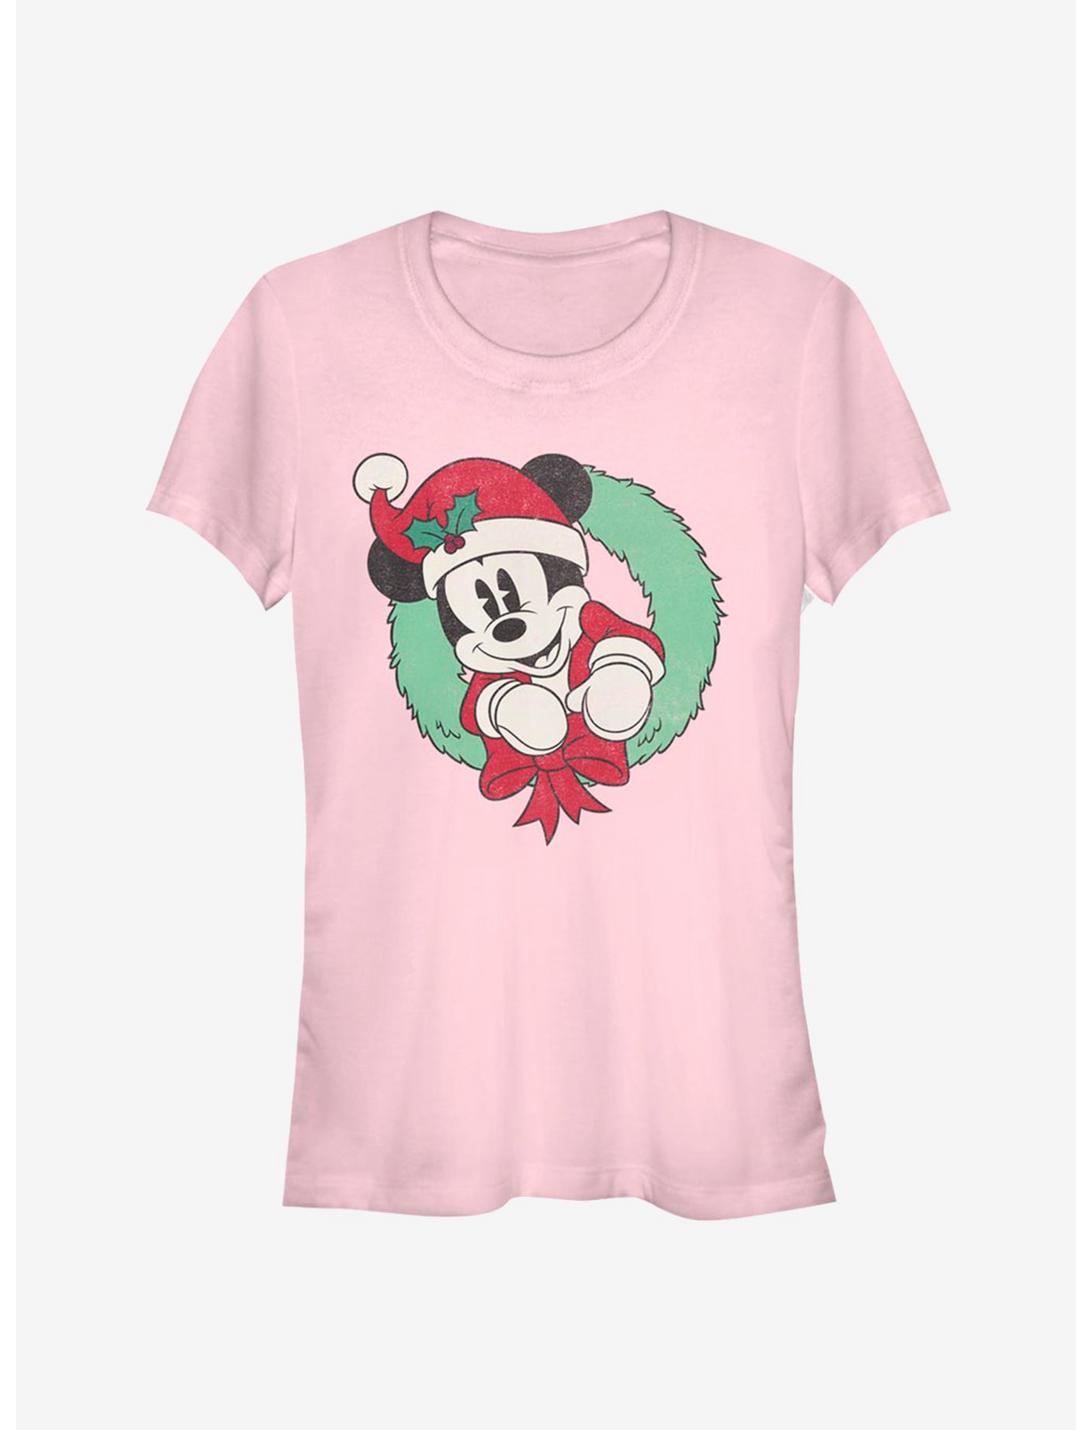 Disney Mickey Mouse Vintage Christmas Wreath Classic Girls T-Shirt, LIGHT PINK, hi-res